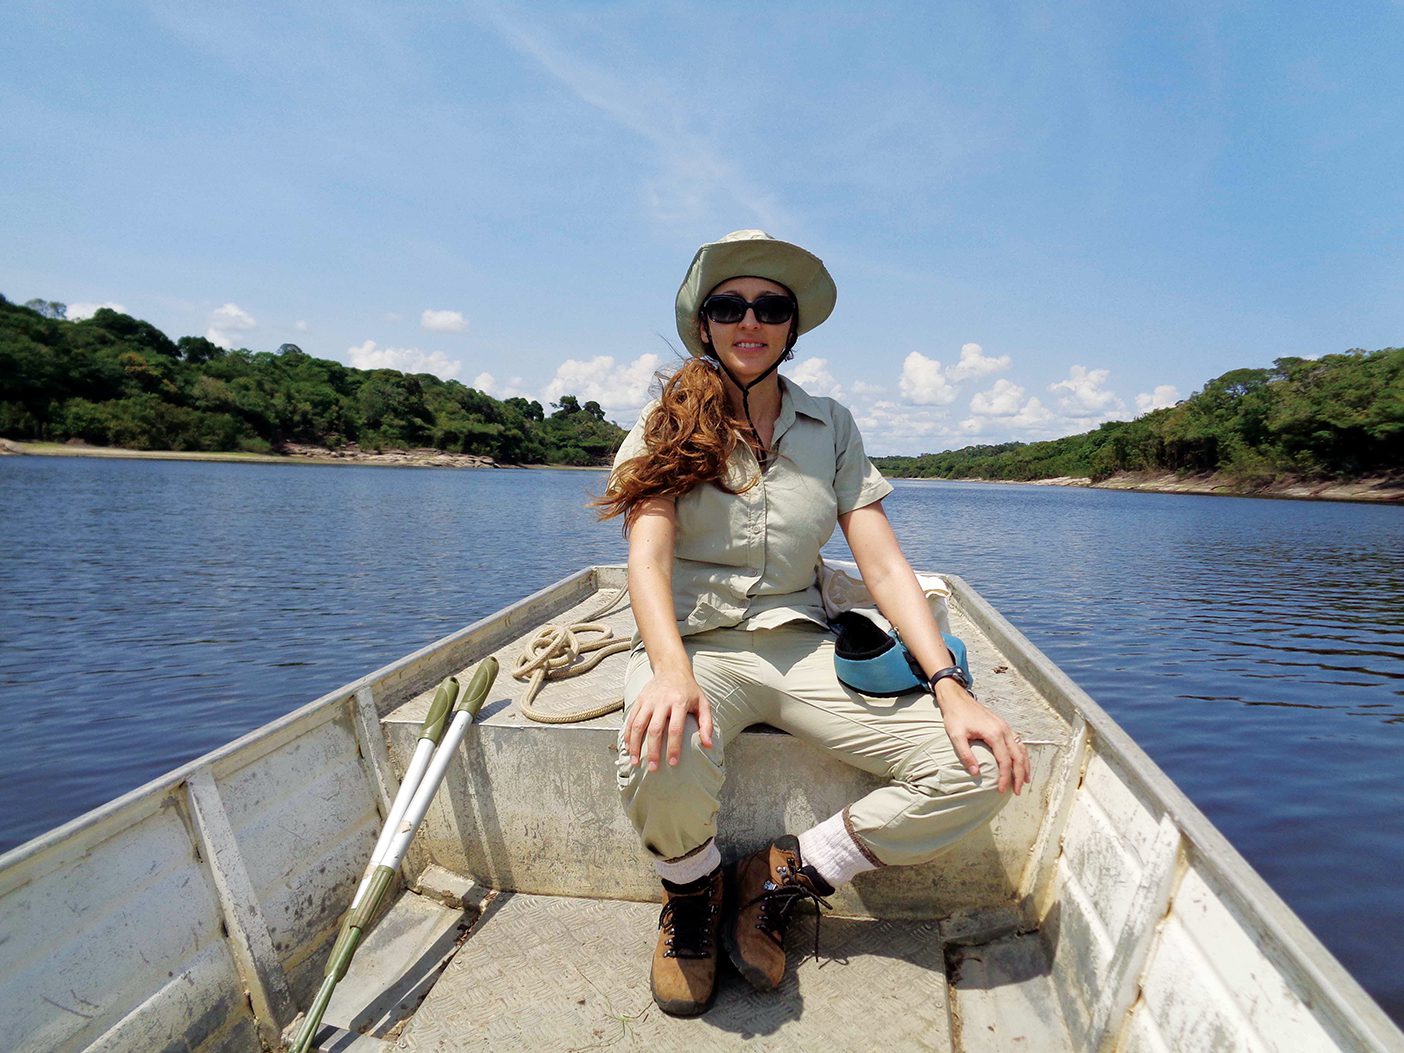 Reptile and amphibian researcher Fernanda Werneck on a boat in the Amazon.